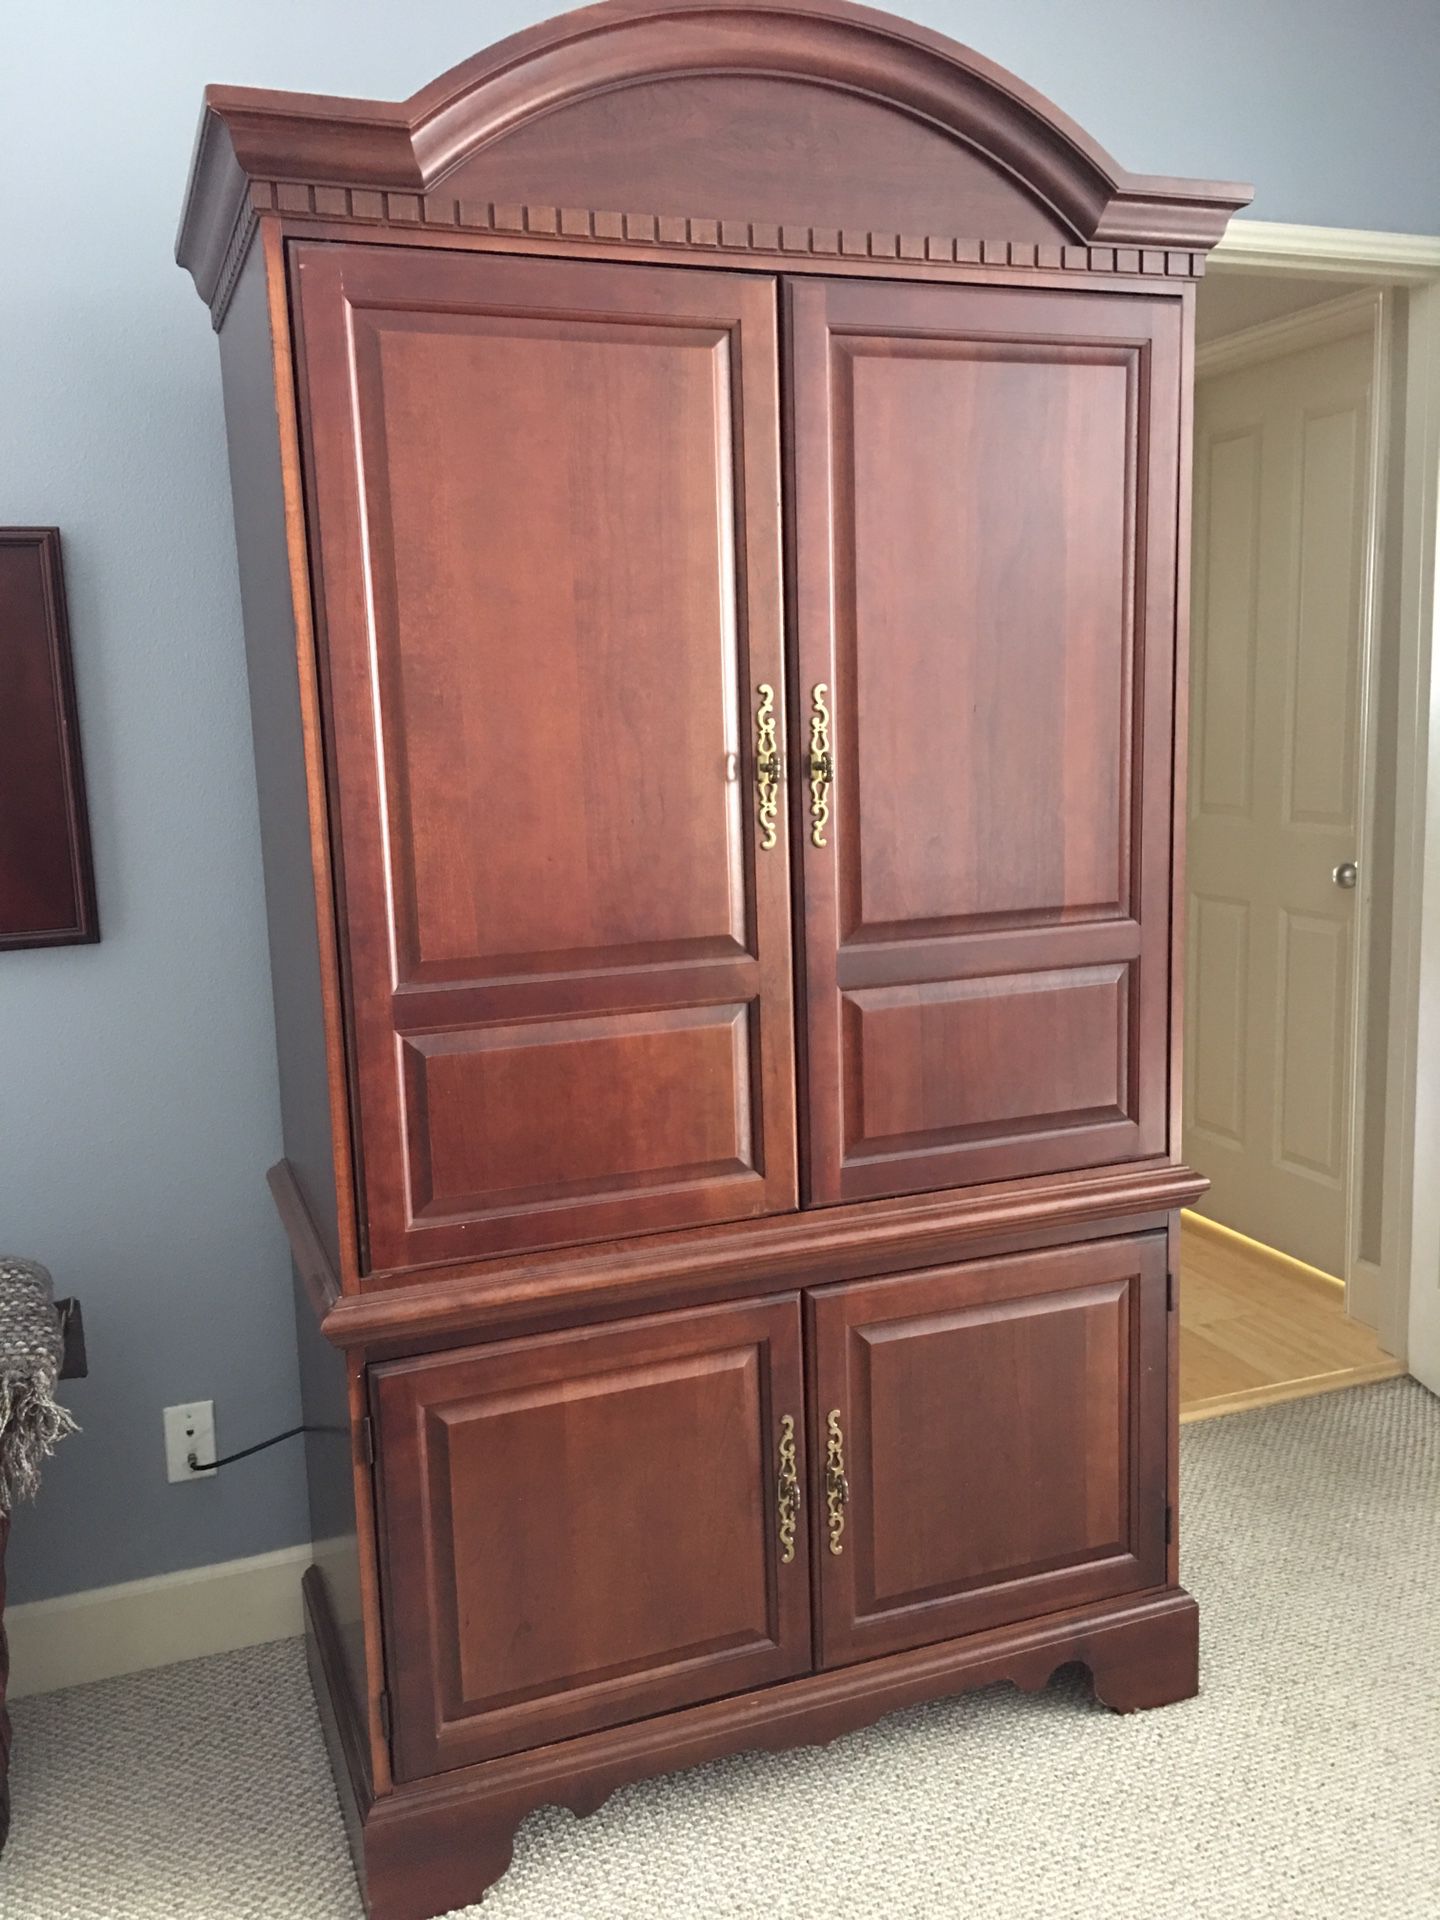 Large, solid, hardwood armoire